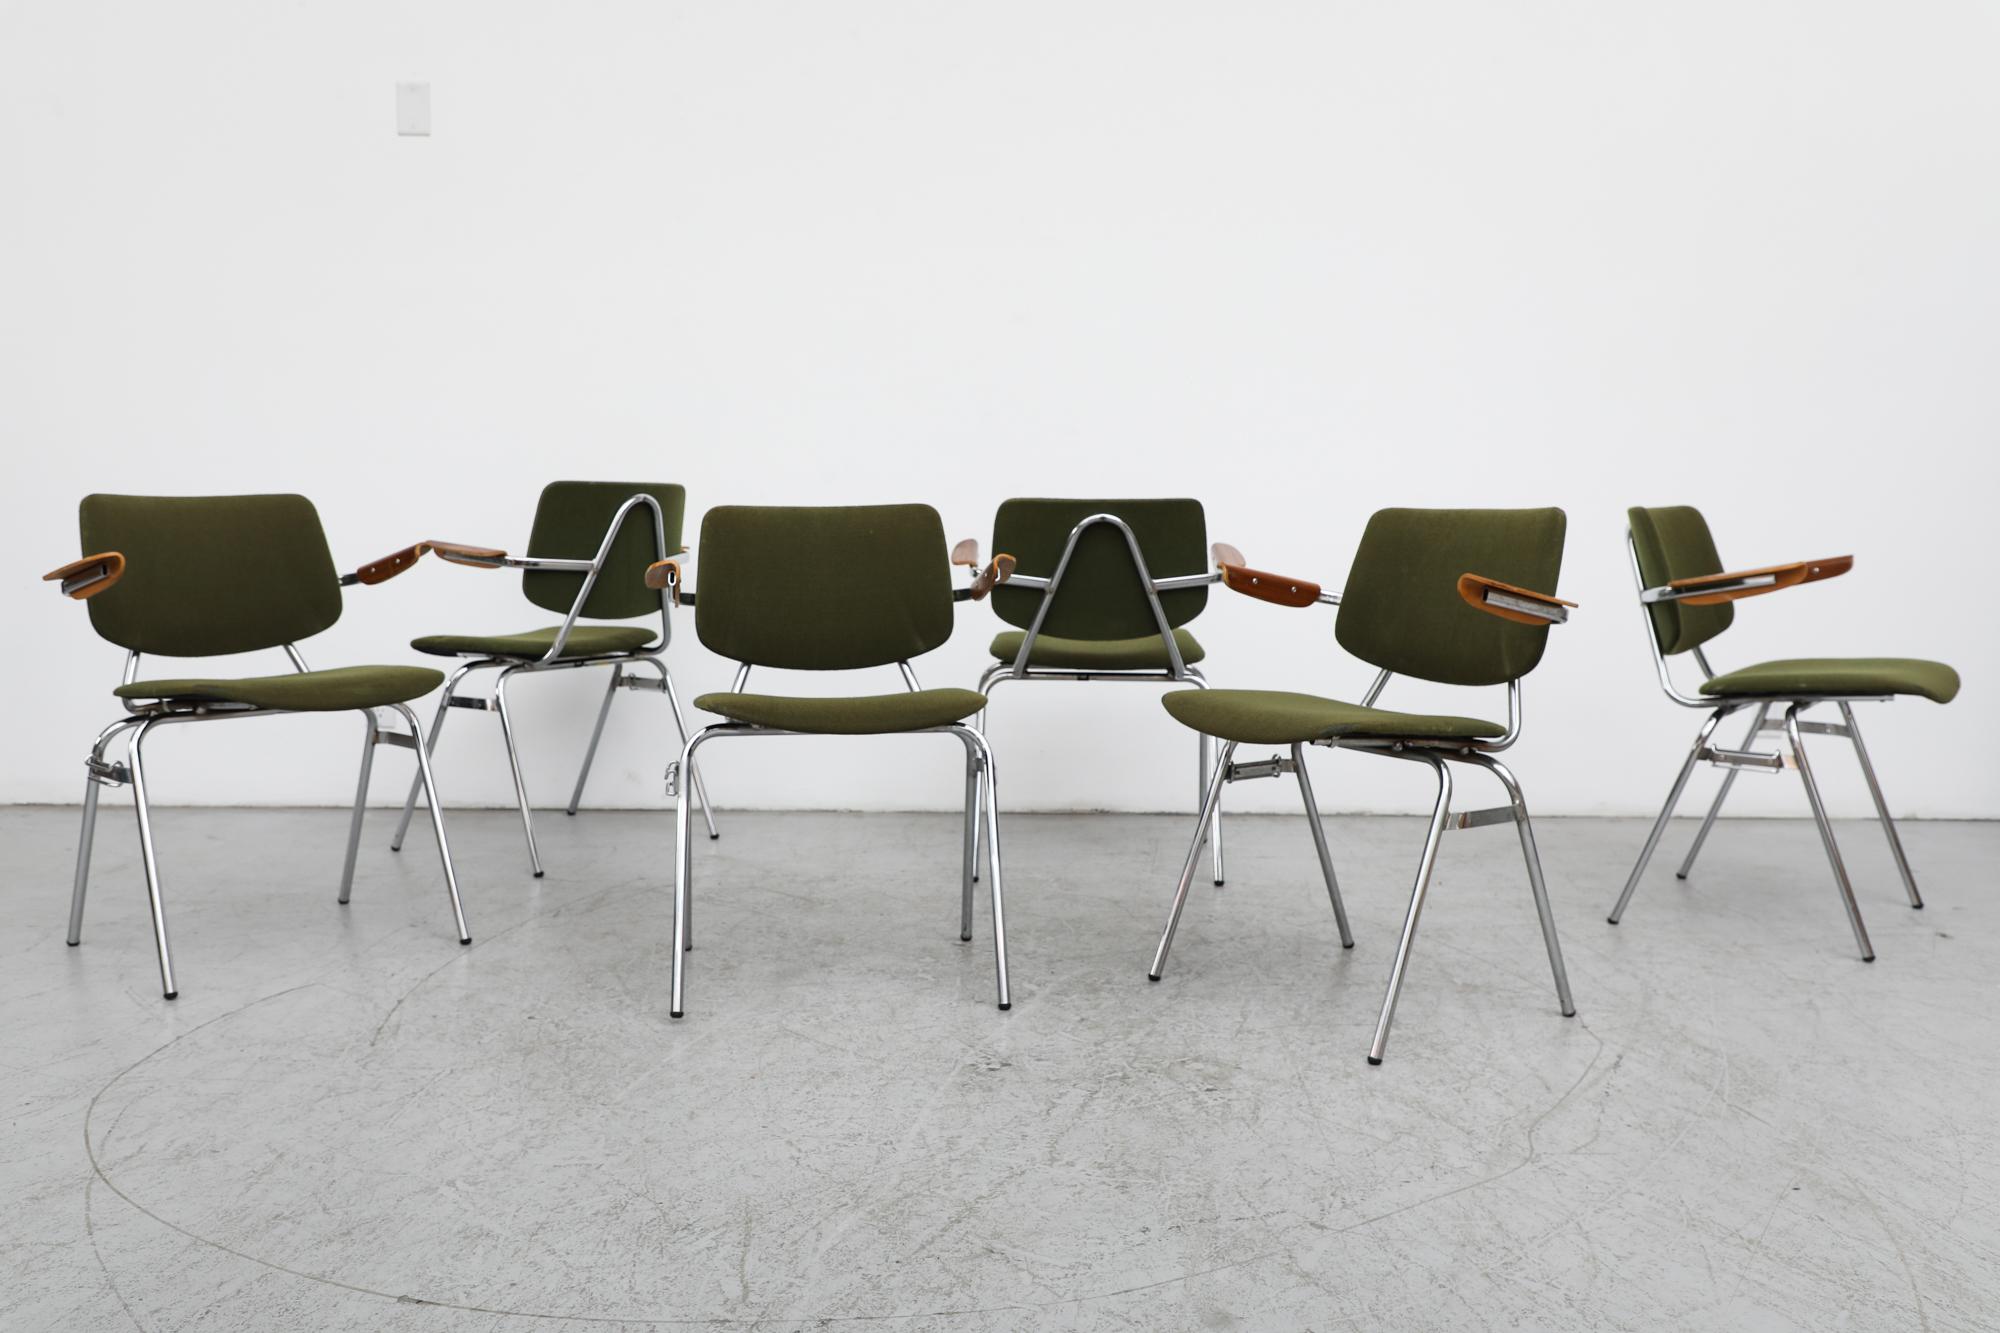 ‘Model 395 B/Z’ stacking Chairs, part of the 300 Series designed by Kho Liang Ie for C.A Ruigrok, in 1957. Chrome tubular metal frame with original green upholstery. Teak bentwood armrests. These can stack 3 to 4 high. All are in original condition